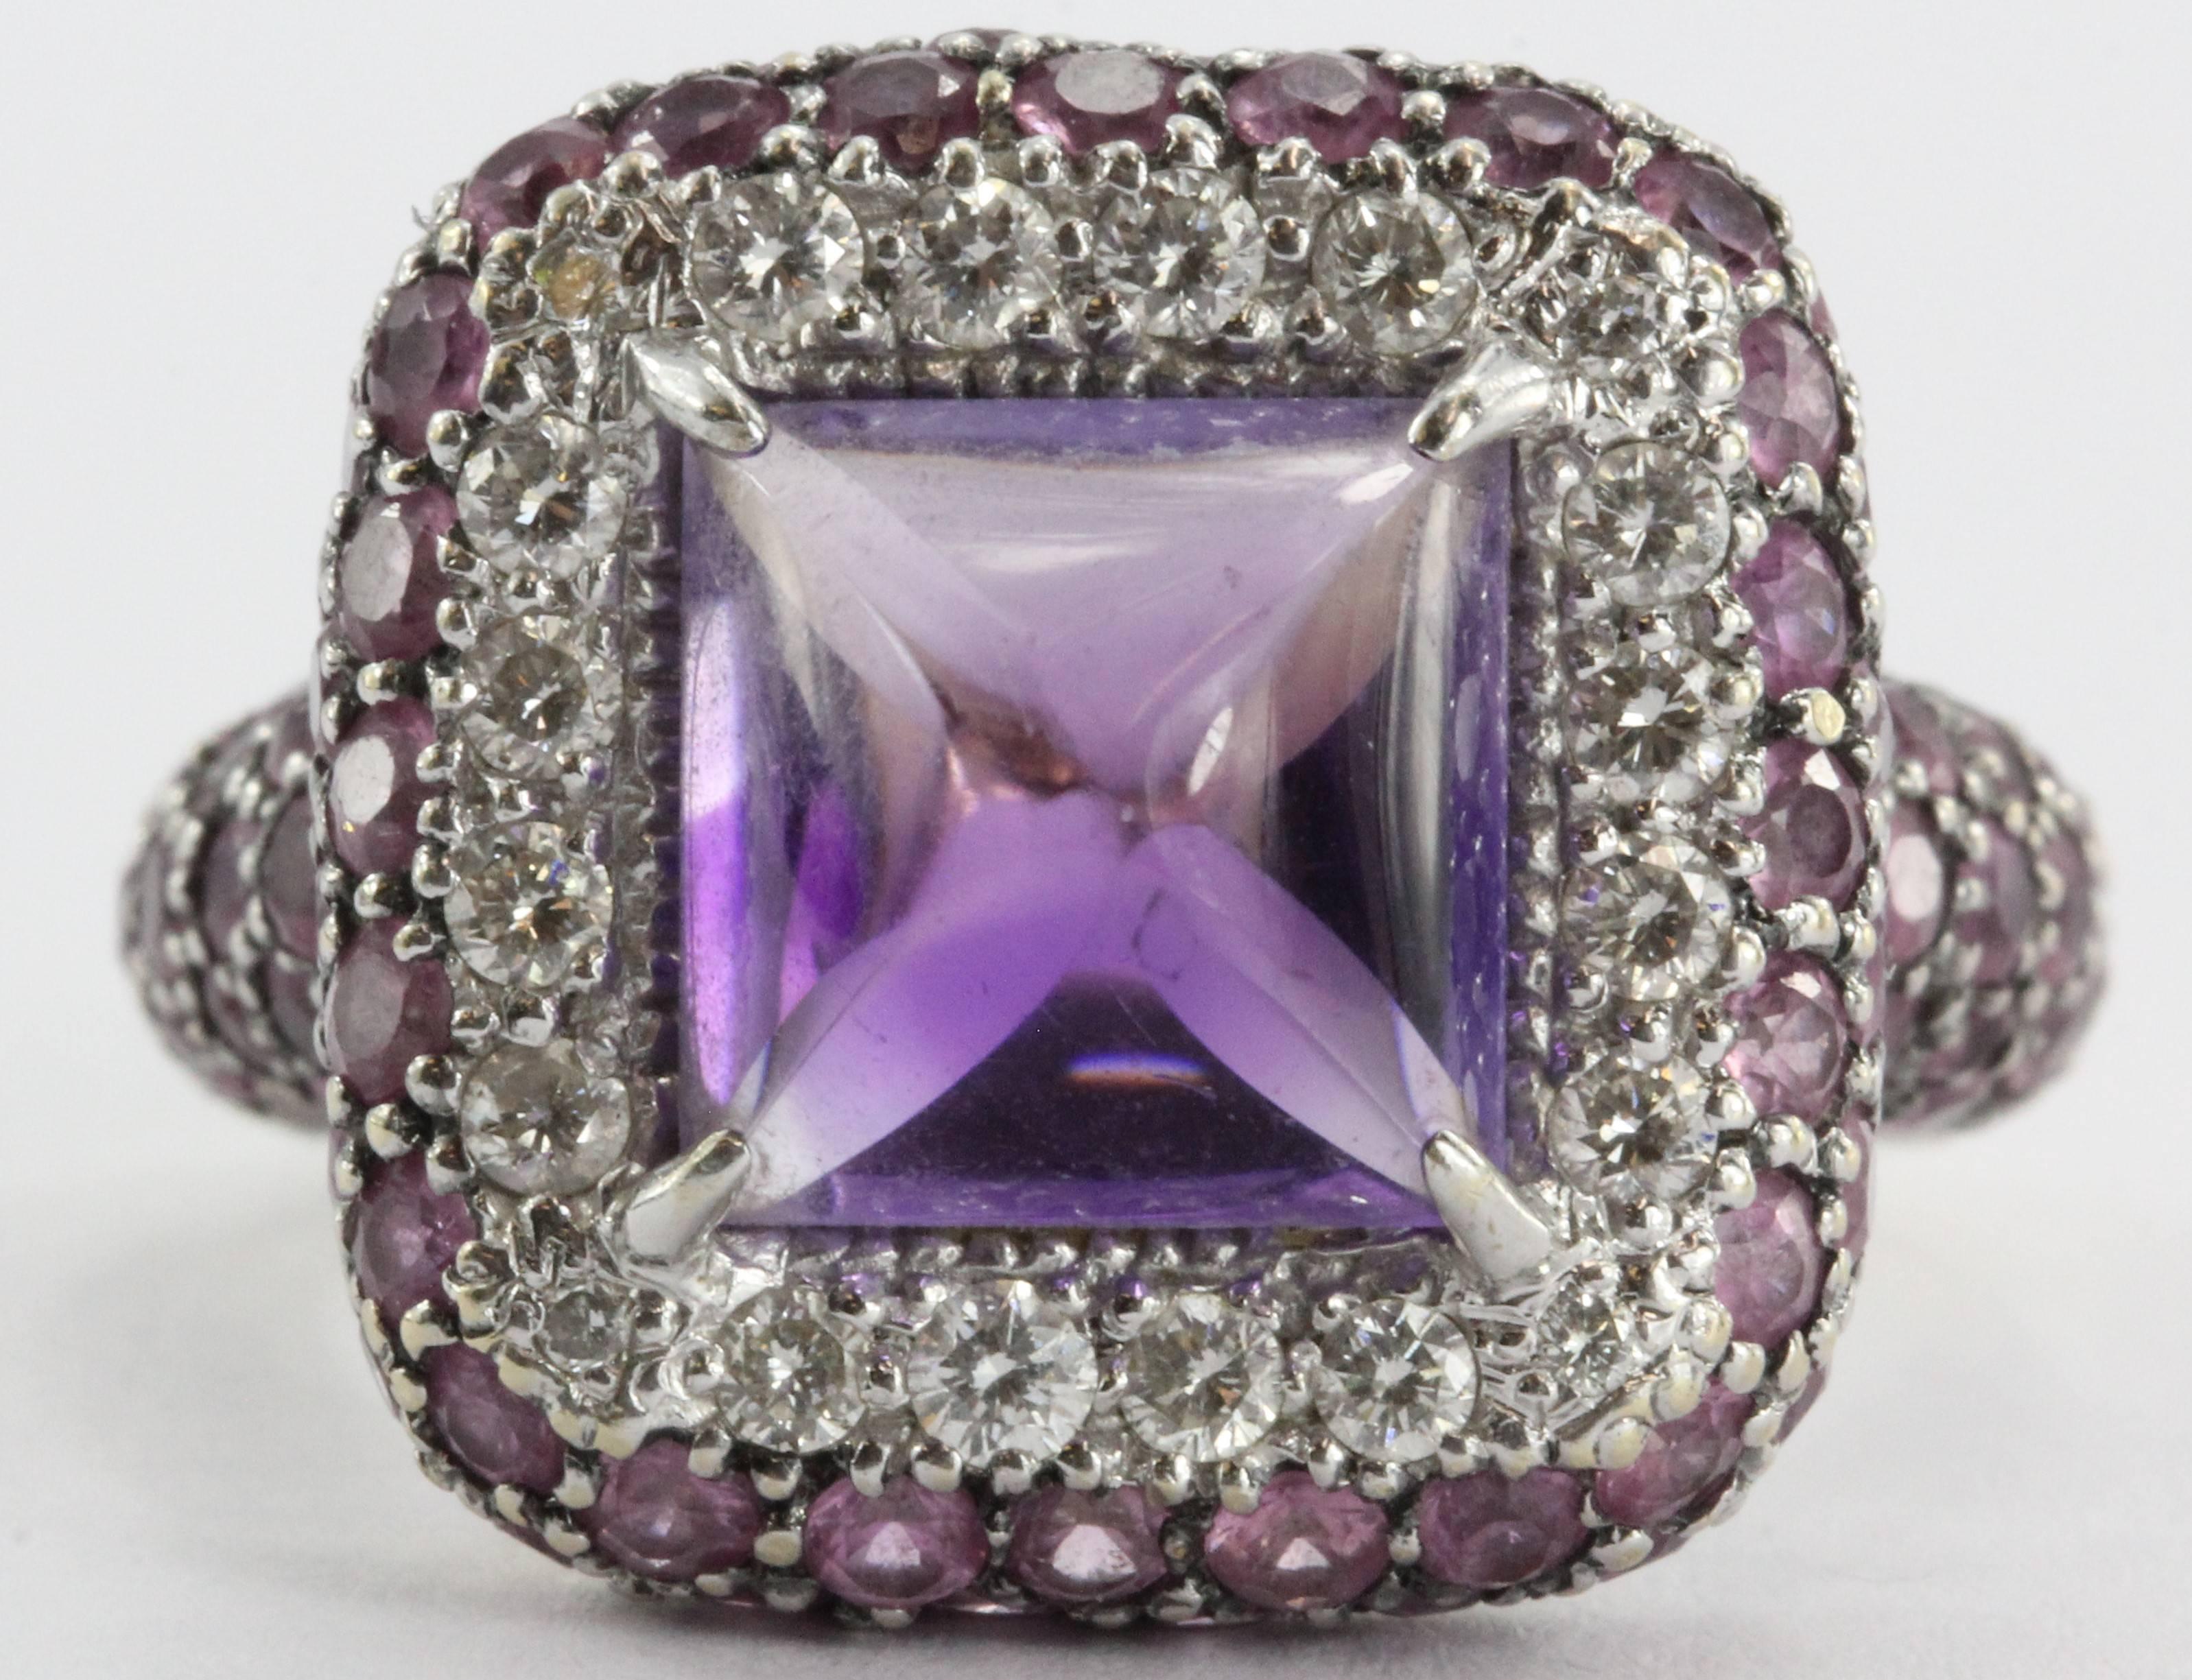 18k White Gold Sugarloaf Amethyst, Diamond, & Pink Sapphire Chunky Ring

Amethyst: 4 Carat Sugarloaf

Diamonds:

F Color

Vs1 Clarity

1 carat total weight

Pink Sapphires: 2 Carats total weight

Total Carat Weight: 7 carats

Ring